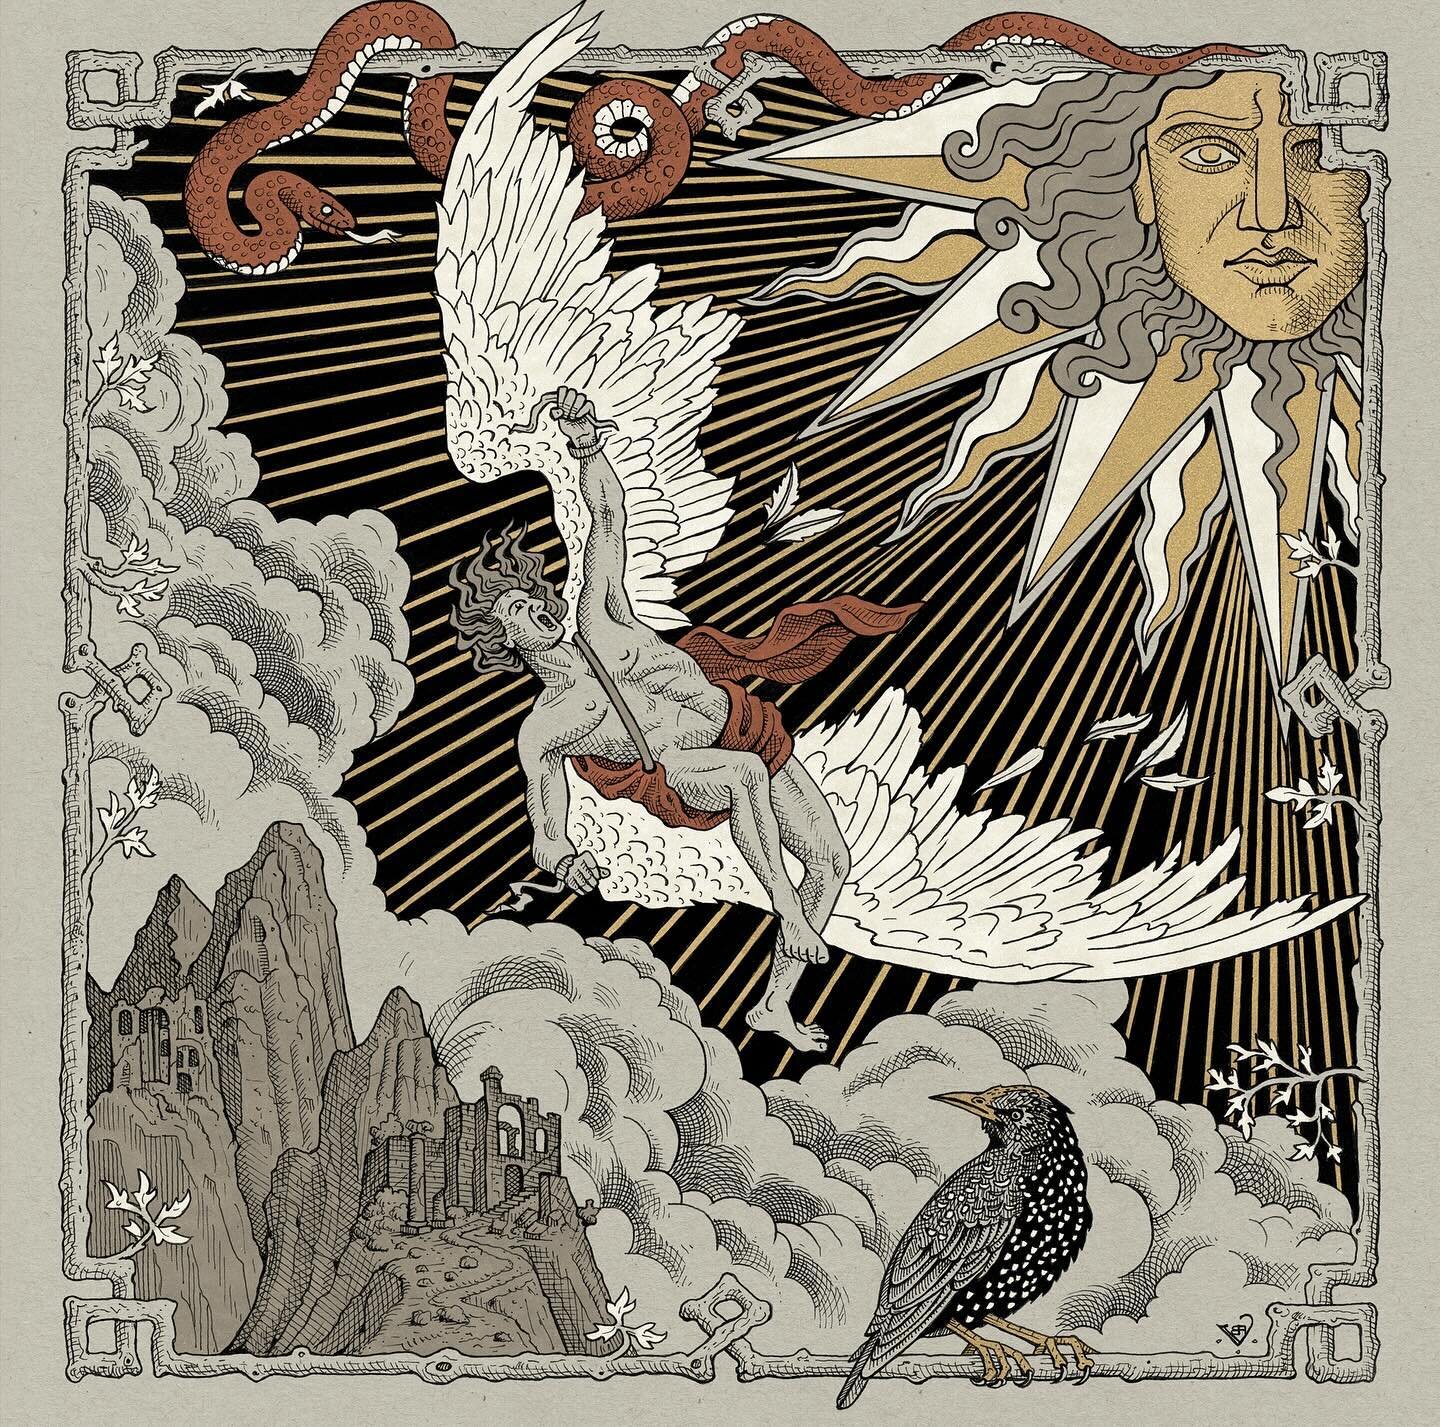 ᛭
Sunne
Album cover illustration for Renewer  @renewerband 
Pen &amp; ink drawing on paper
Color adaptation and layout by Rob Landsburg @shodty 
᛭
Album to be released this February in LP format from @transylvanianrecordings 
᛭
Gratitude to Renewer a